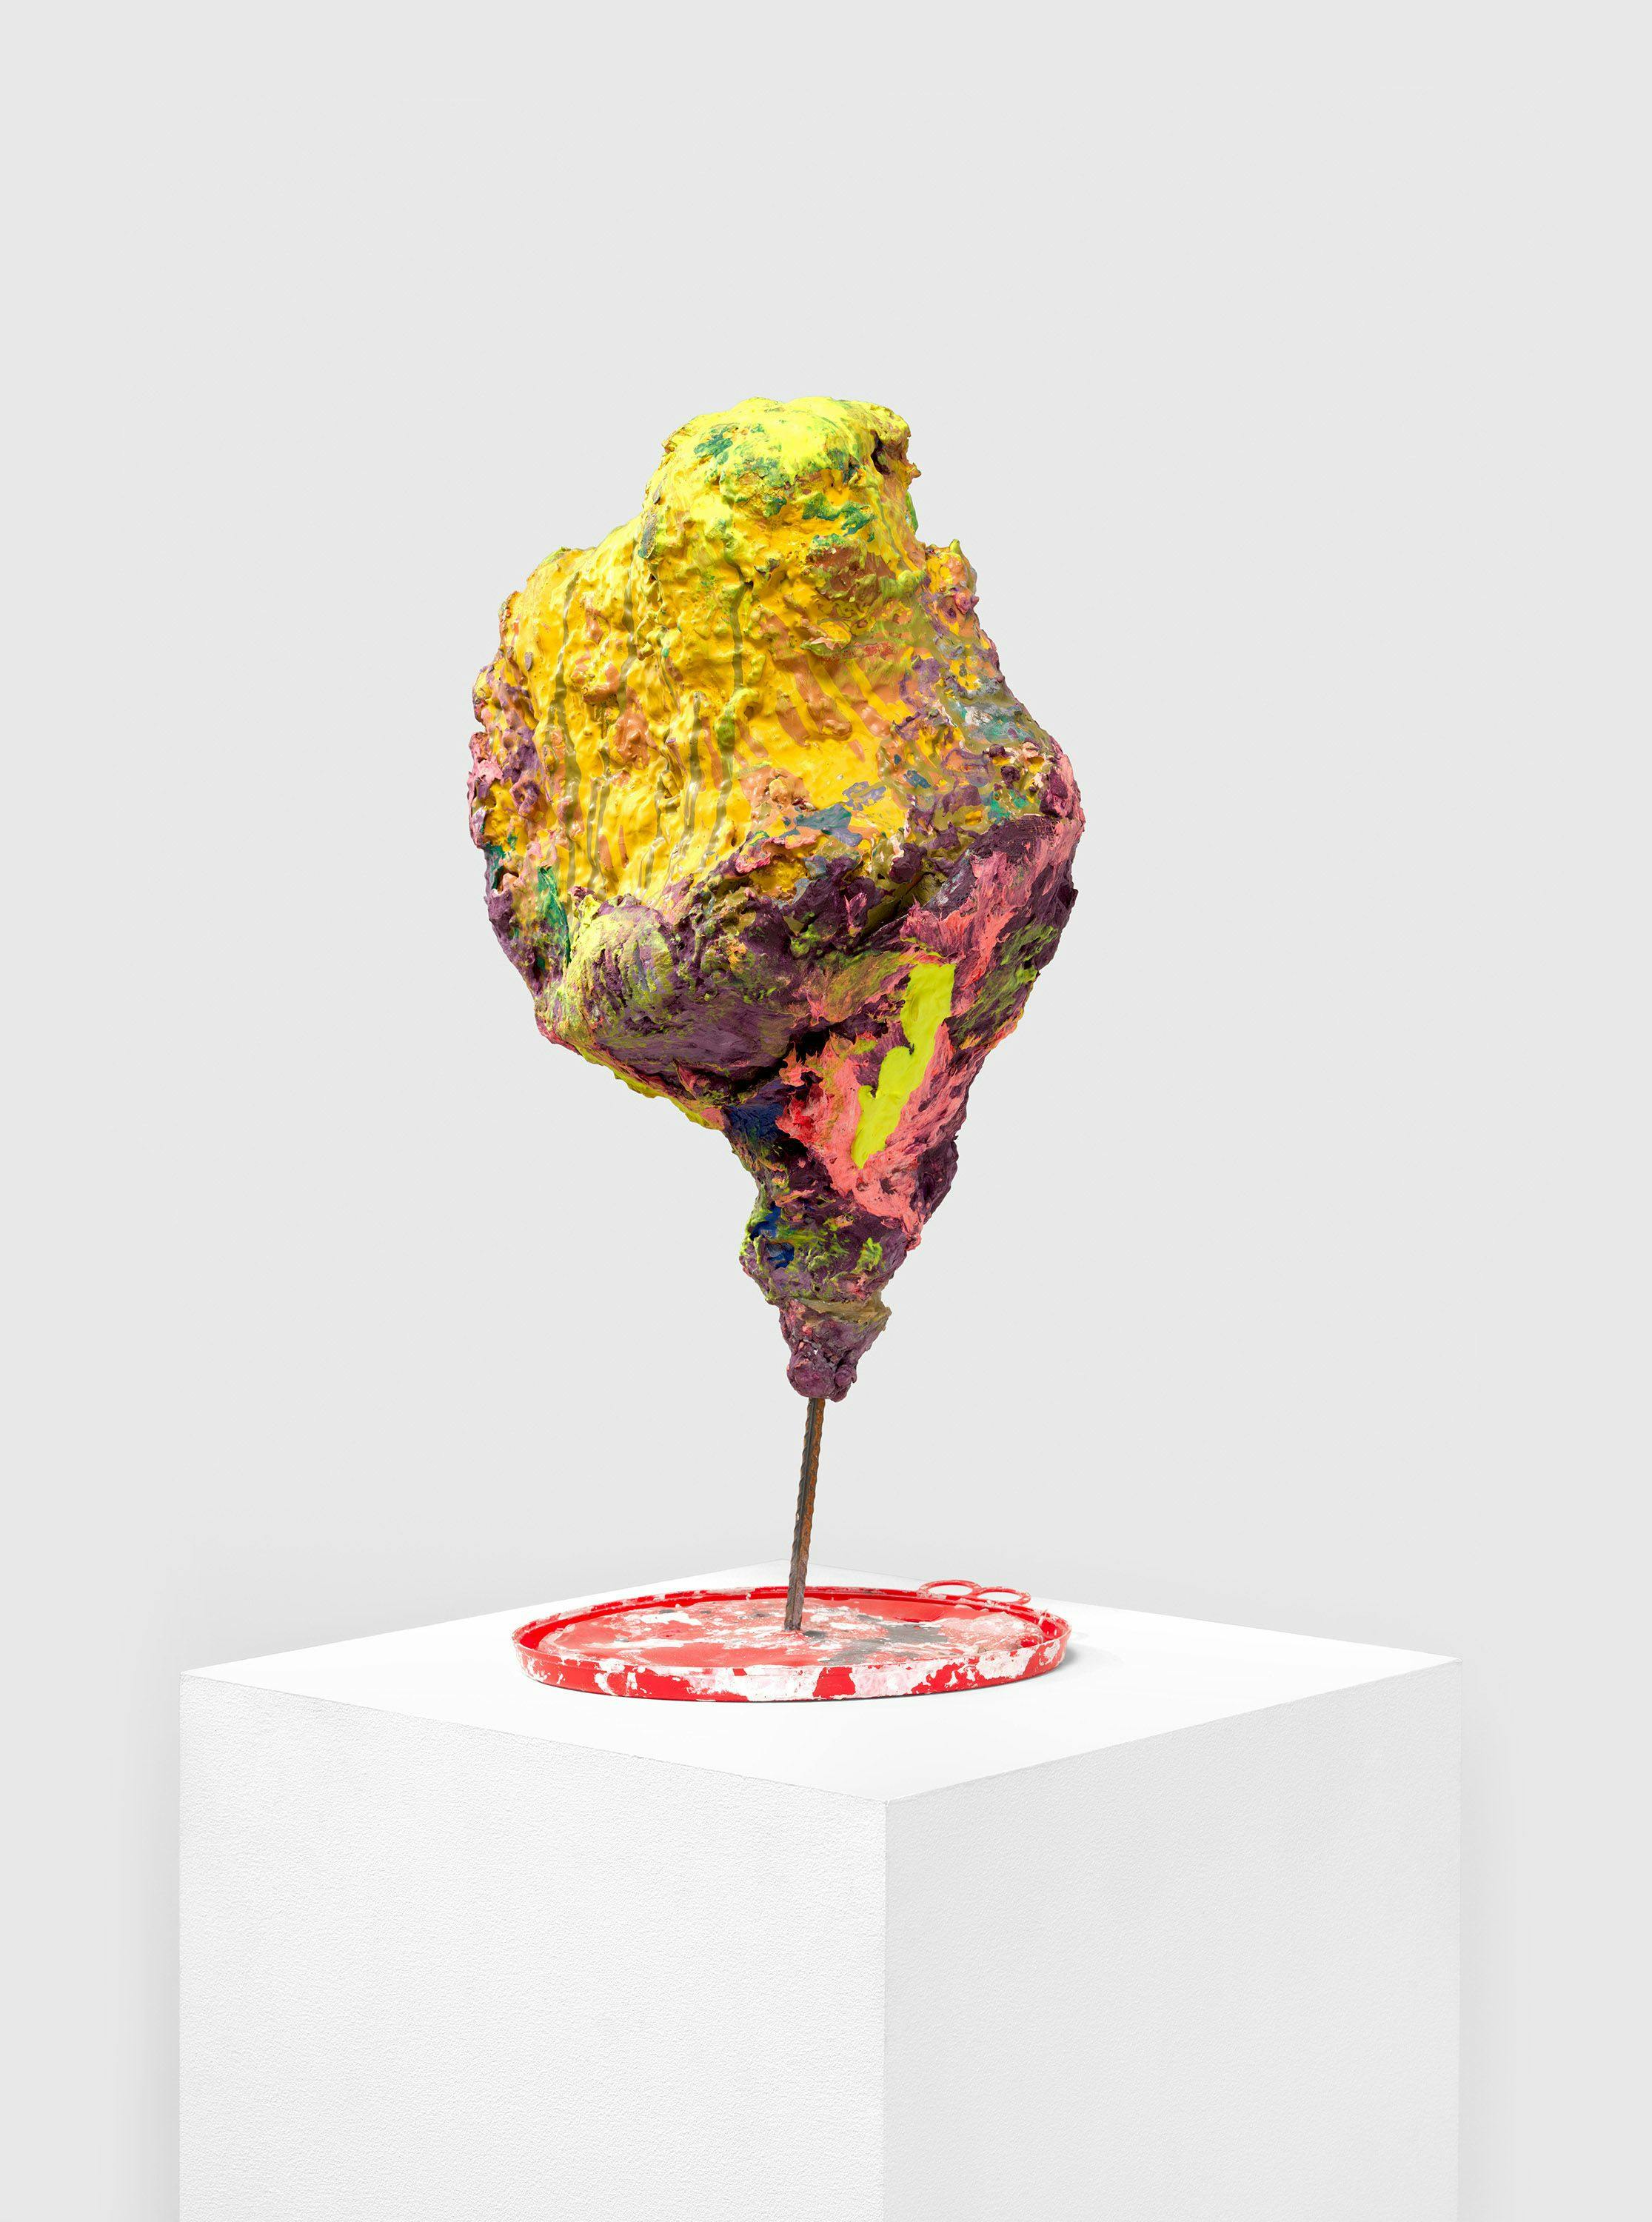 An untitled sculpture by Franz West, dated 1998.